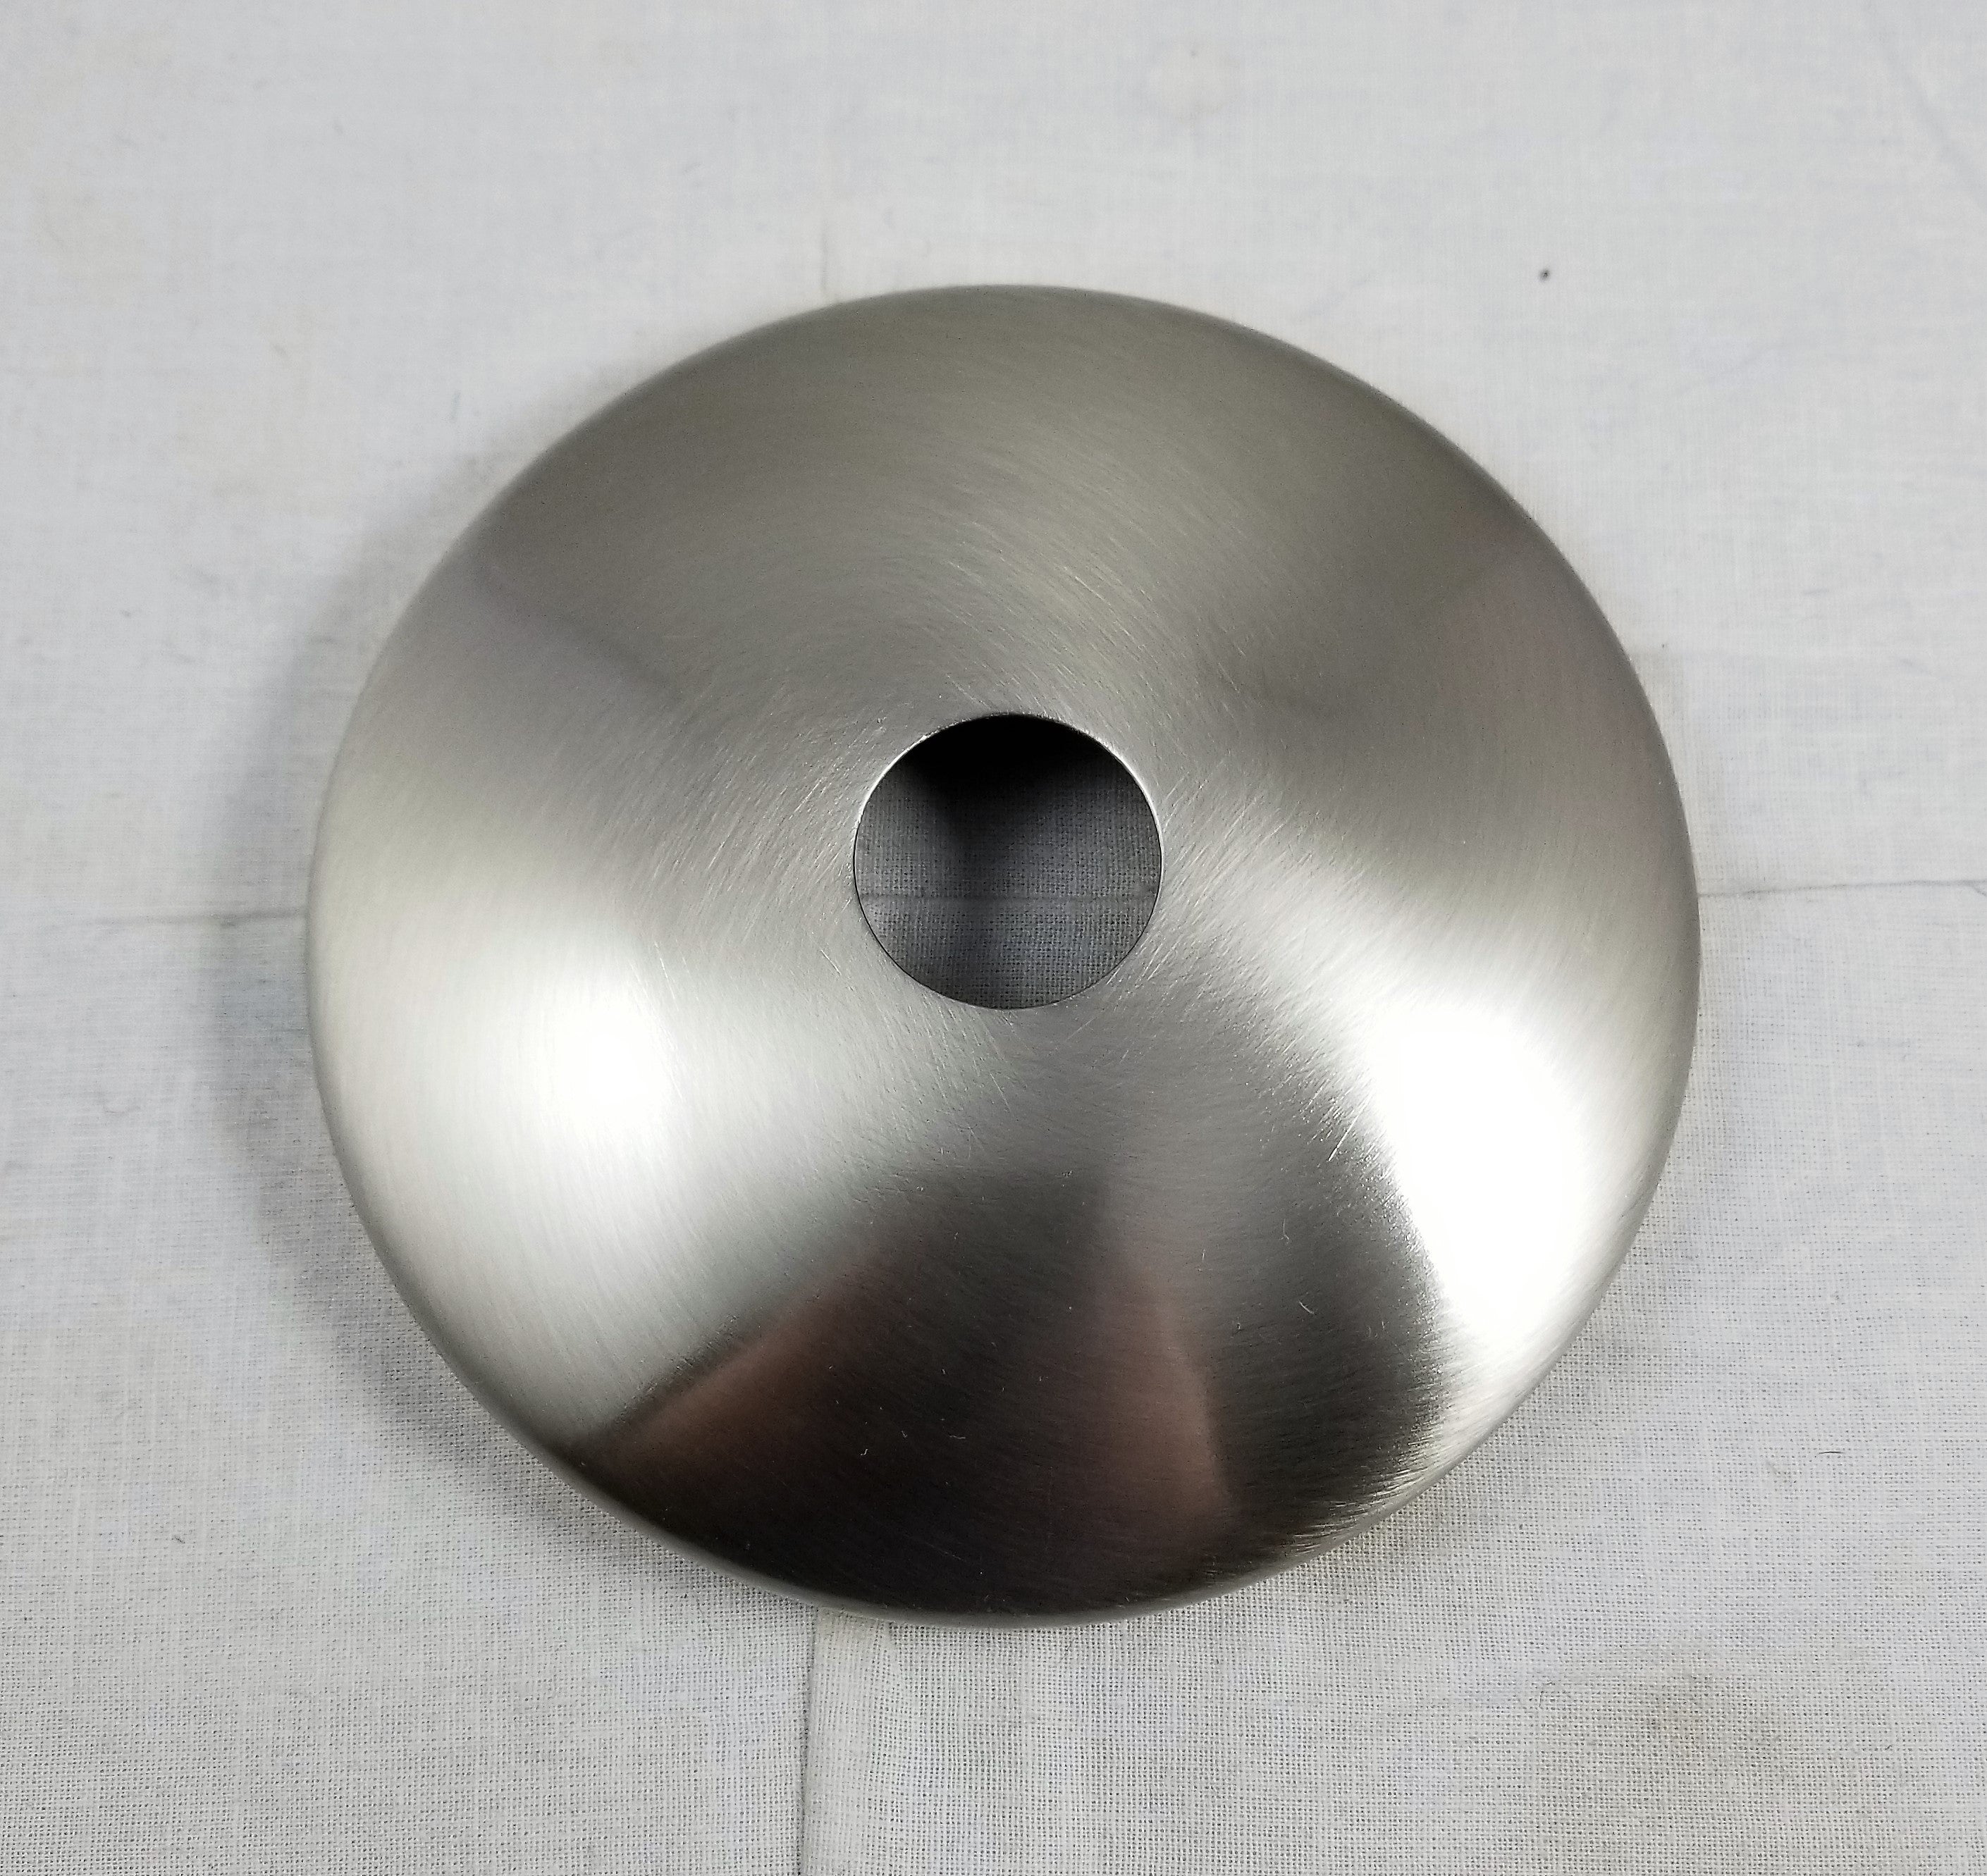 4-7/8" dia. - Satin Nickel Finish Canopy  ** OUT OF STOCK**